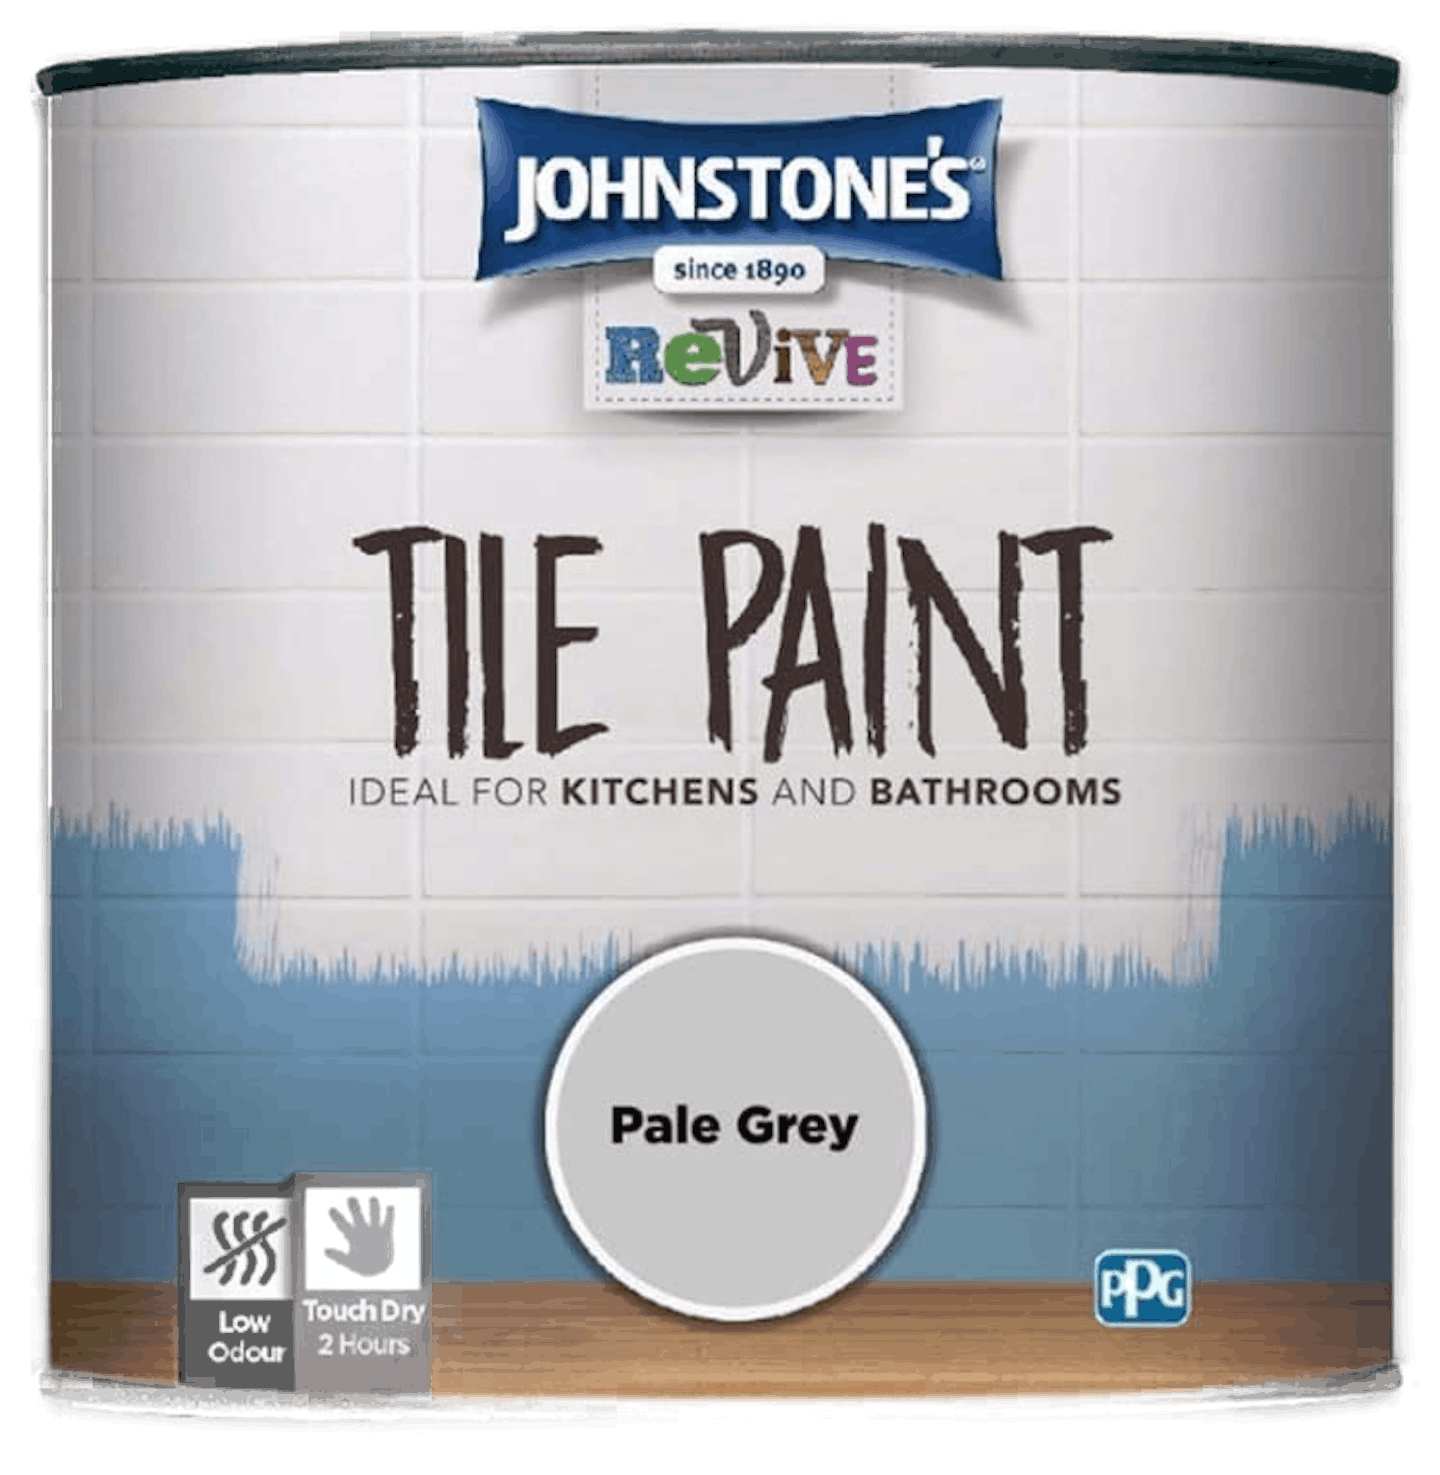 A tin of Johnstone's tile paint